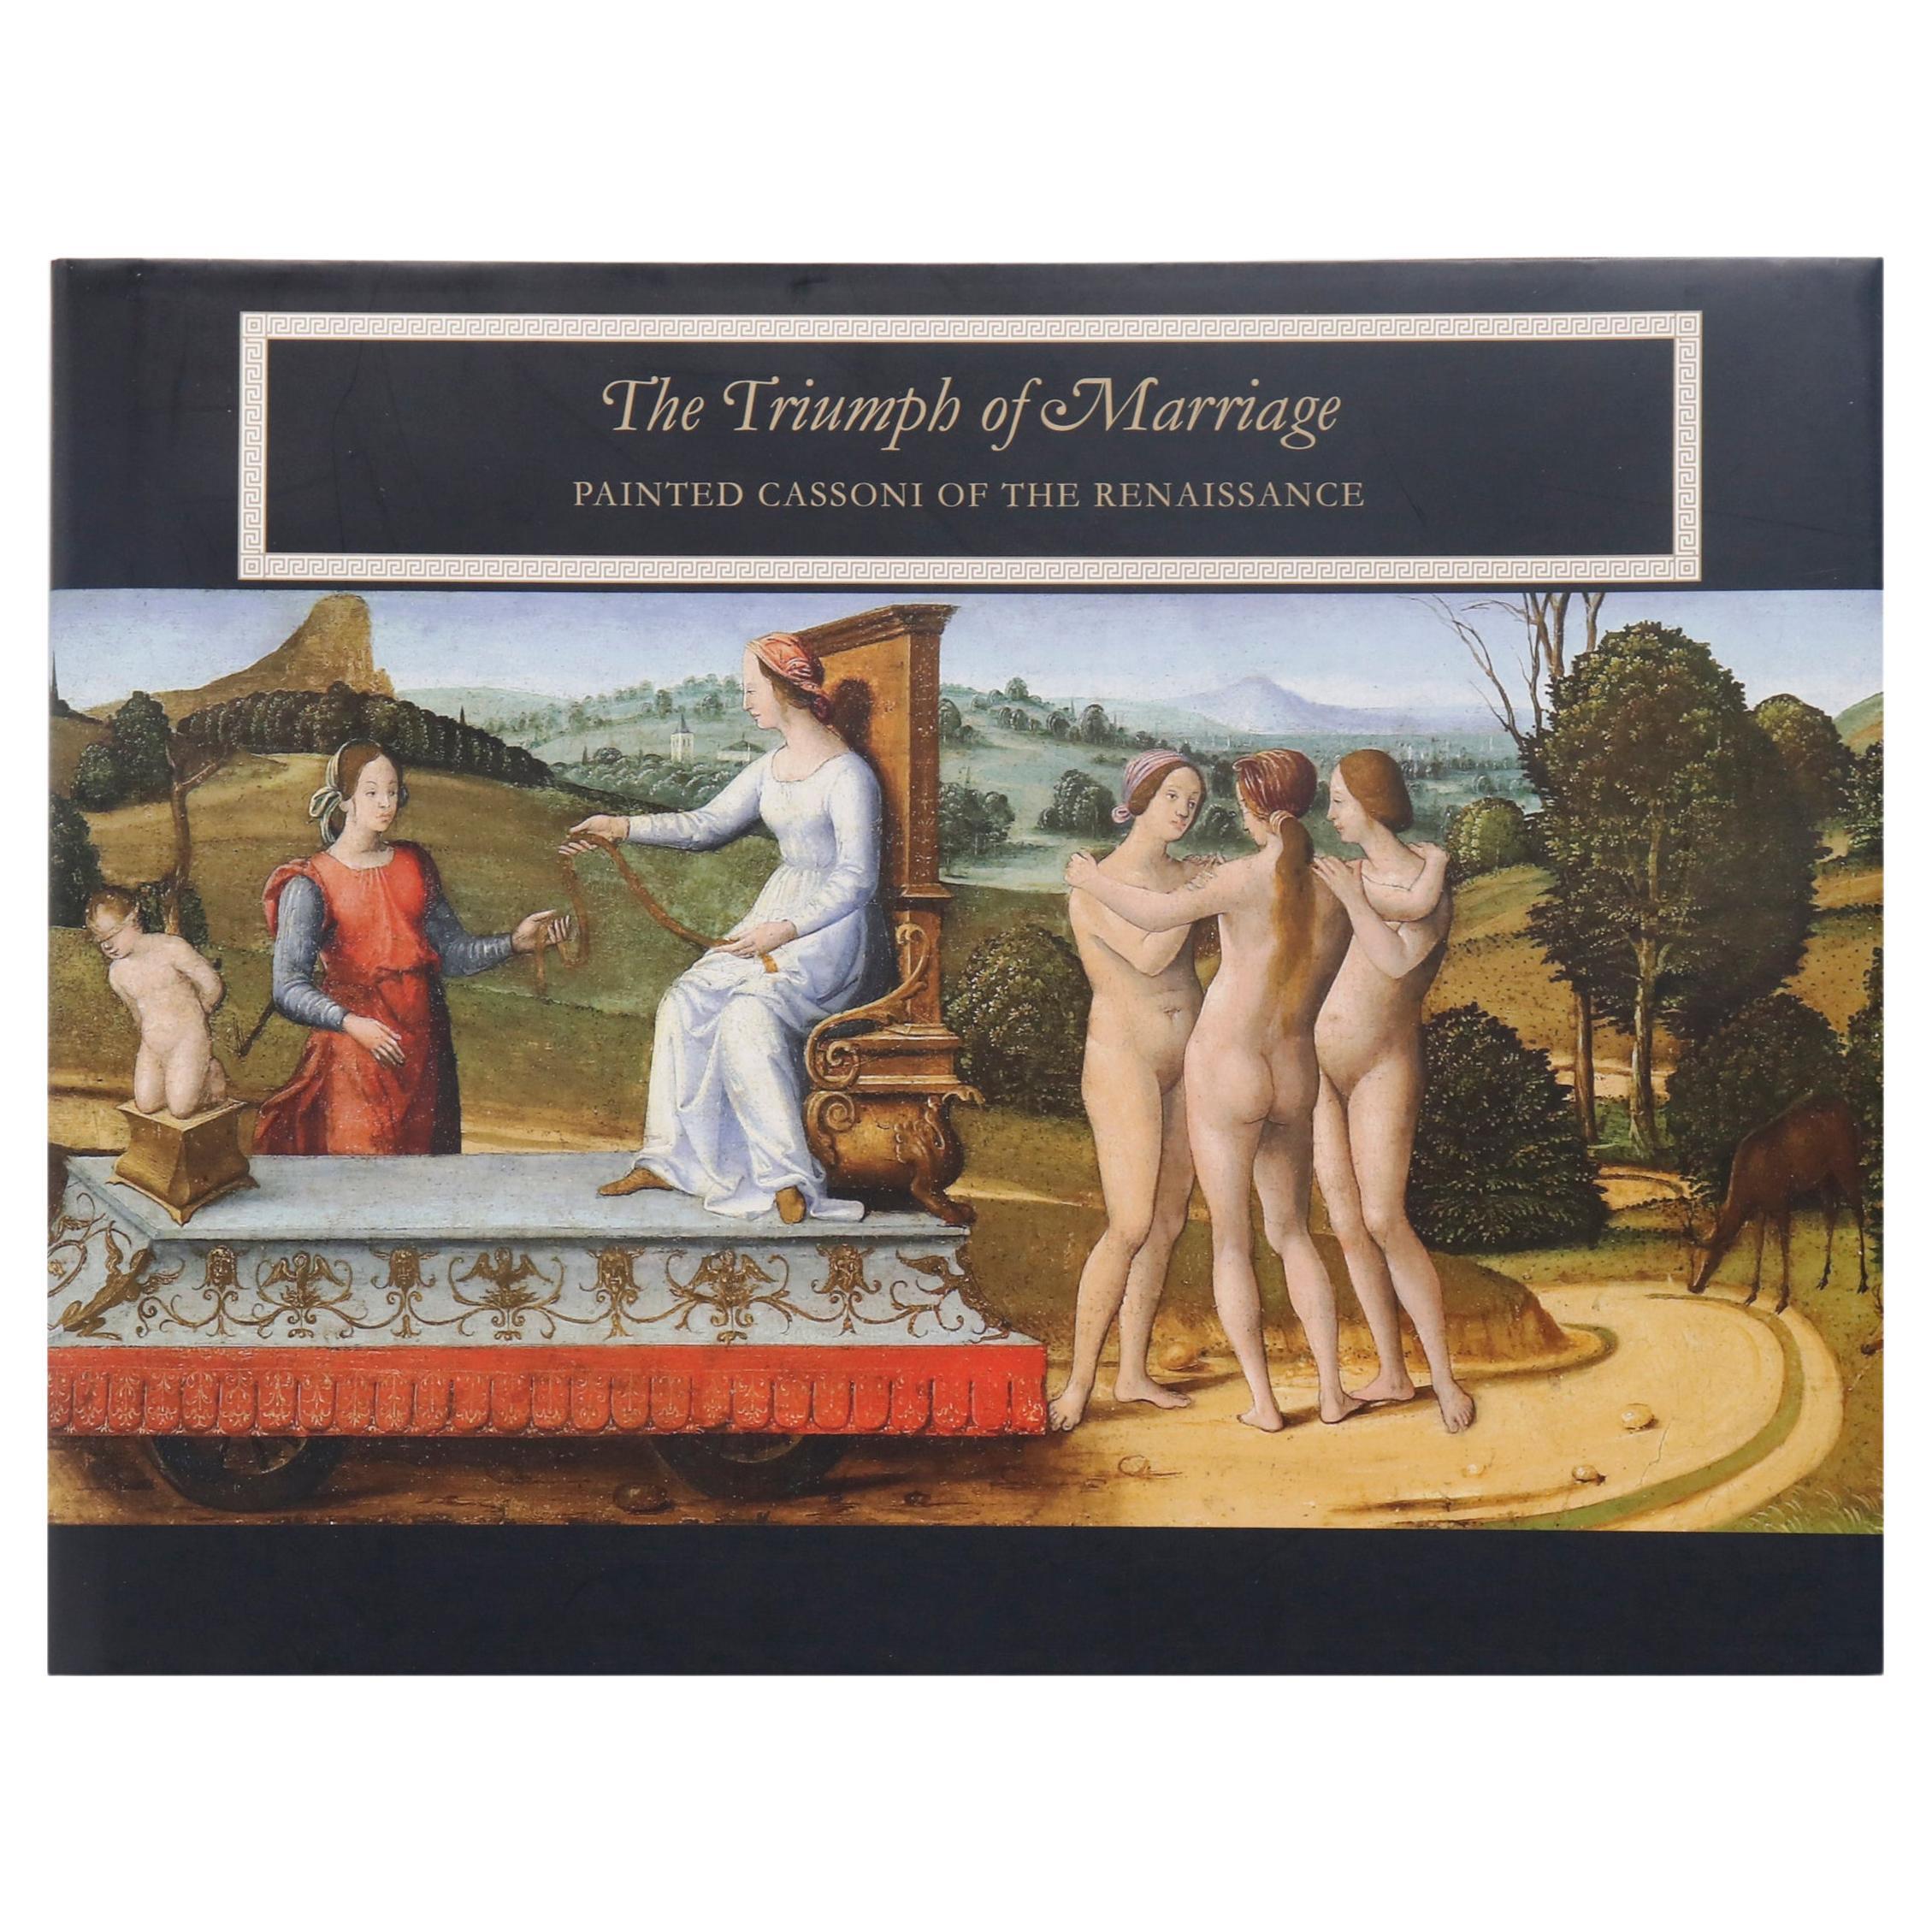 The Triumph of Marriage, Painted Cassoni of the Renaissance